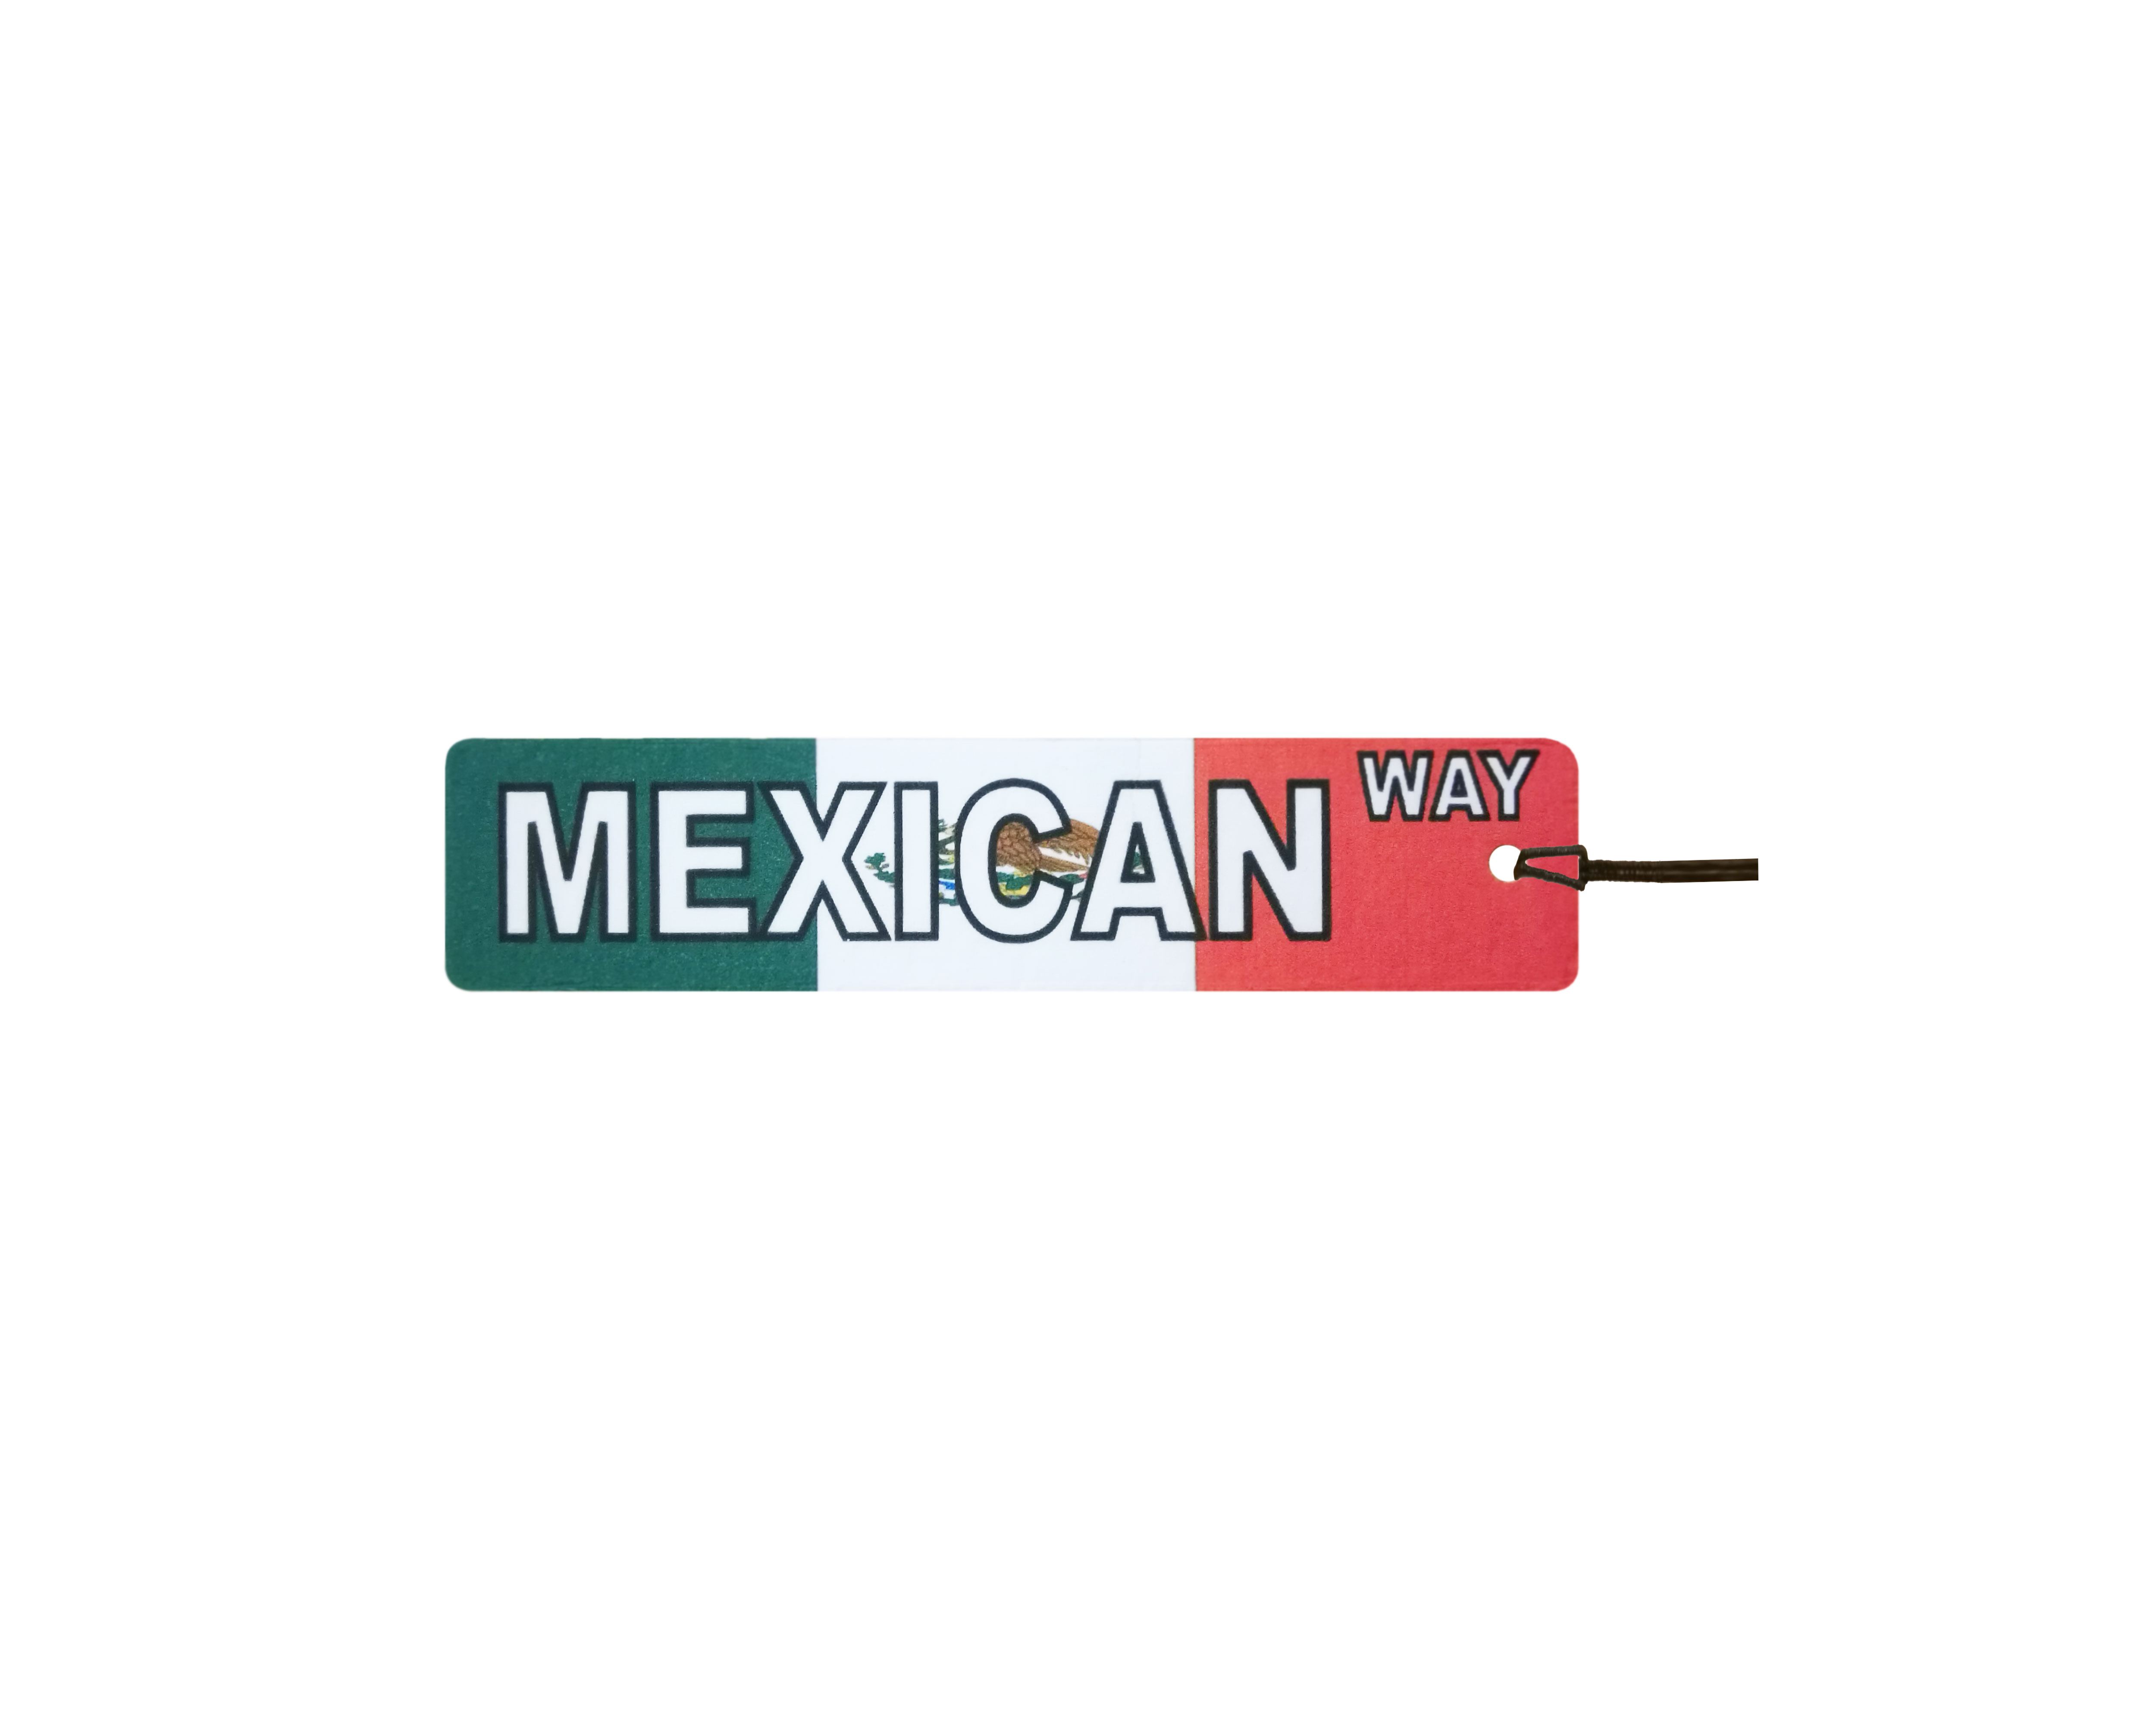 Mexican Way Street Sign